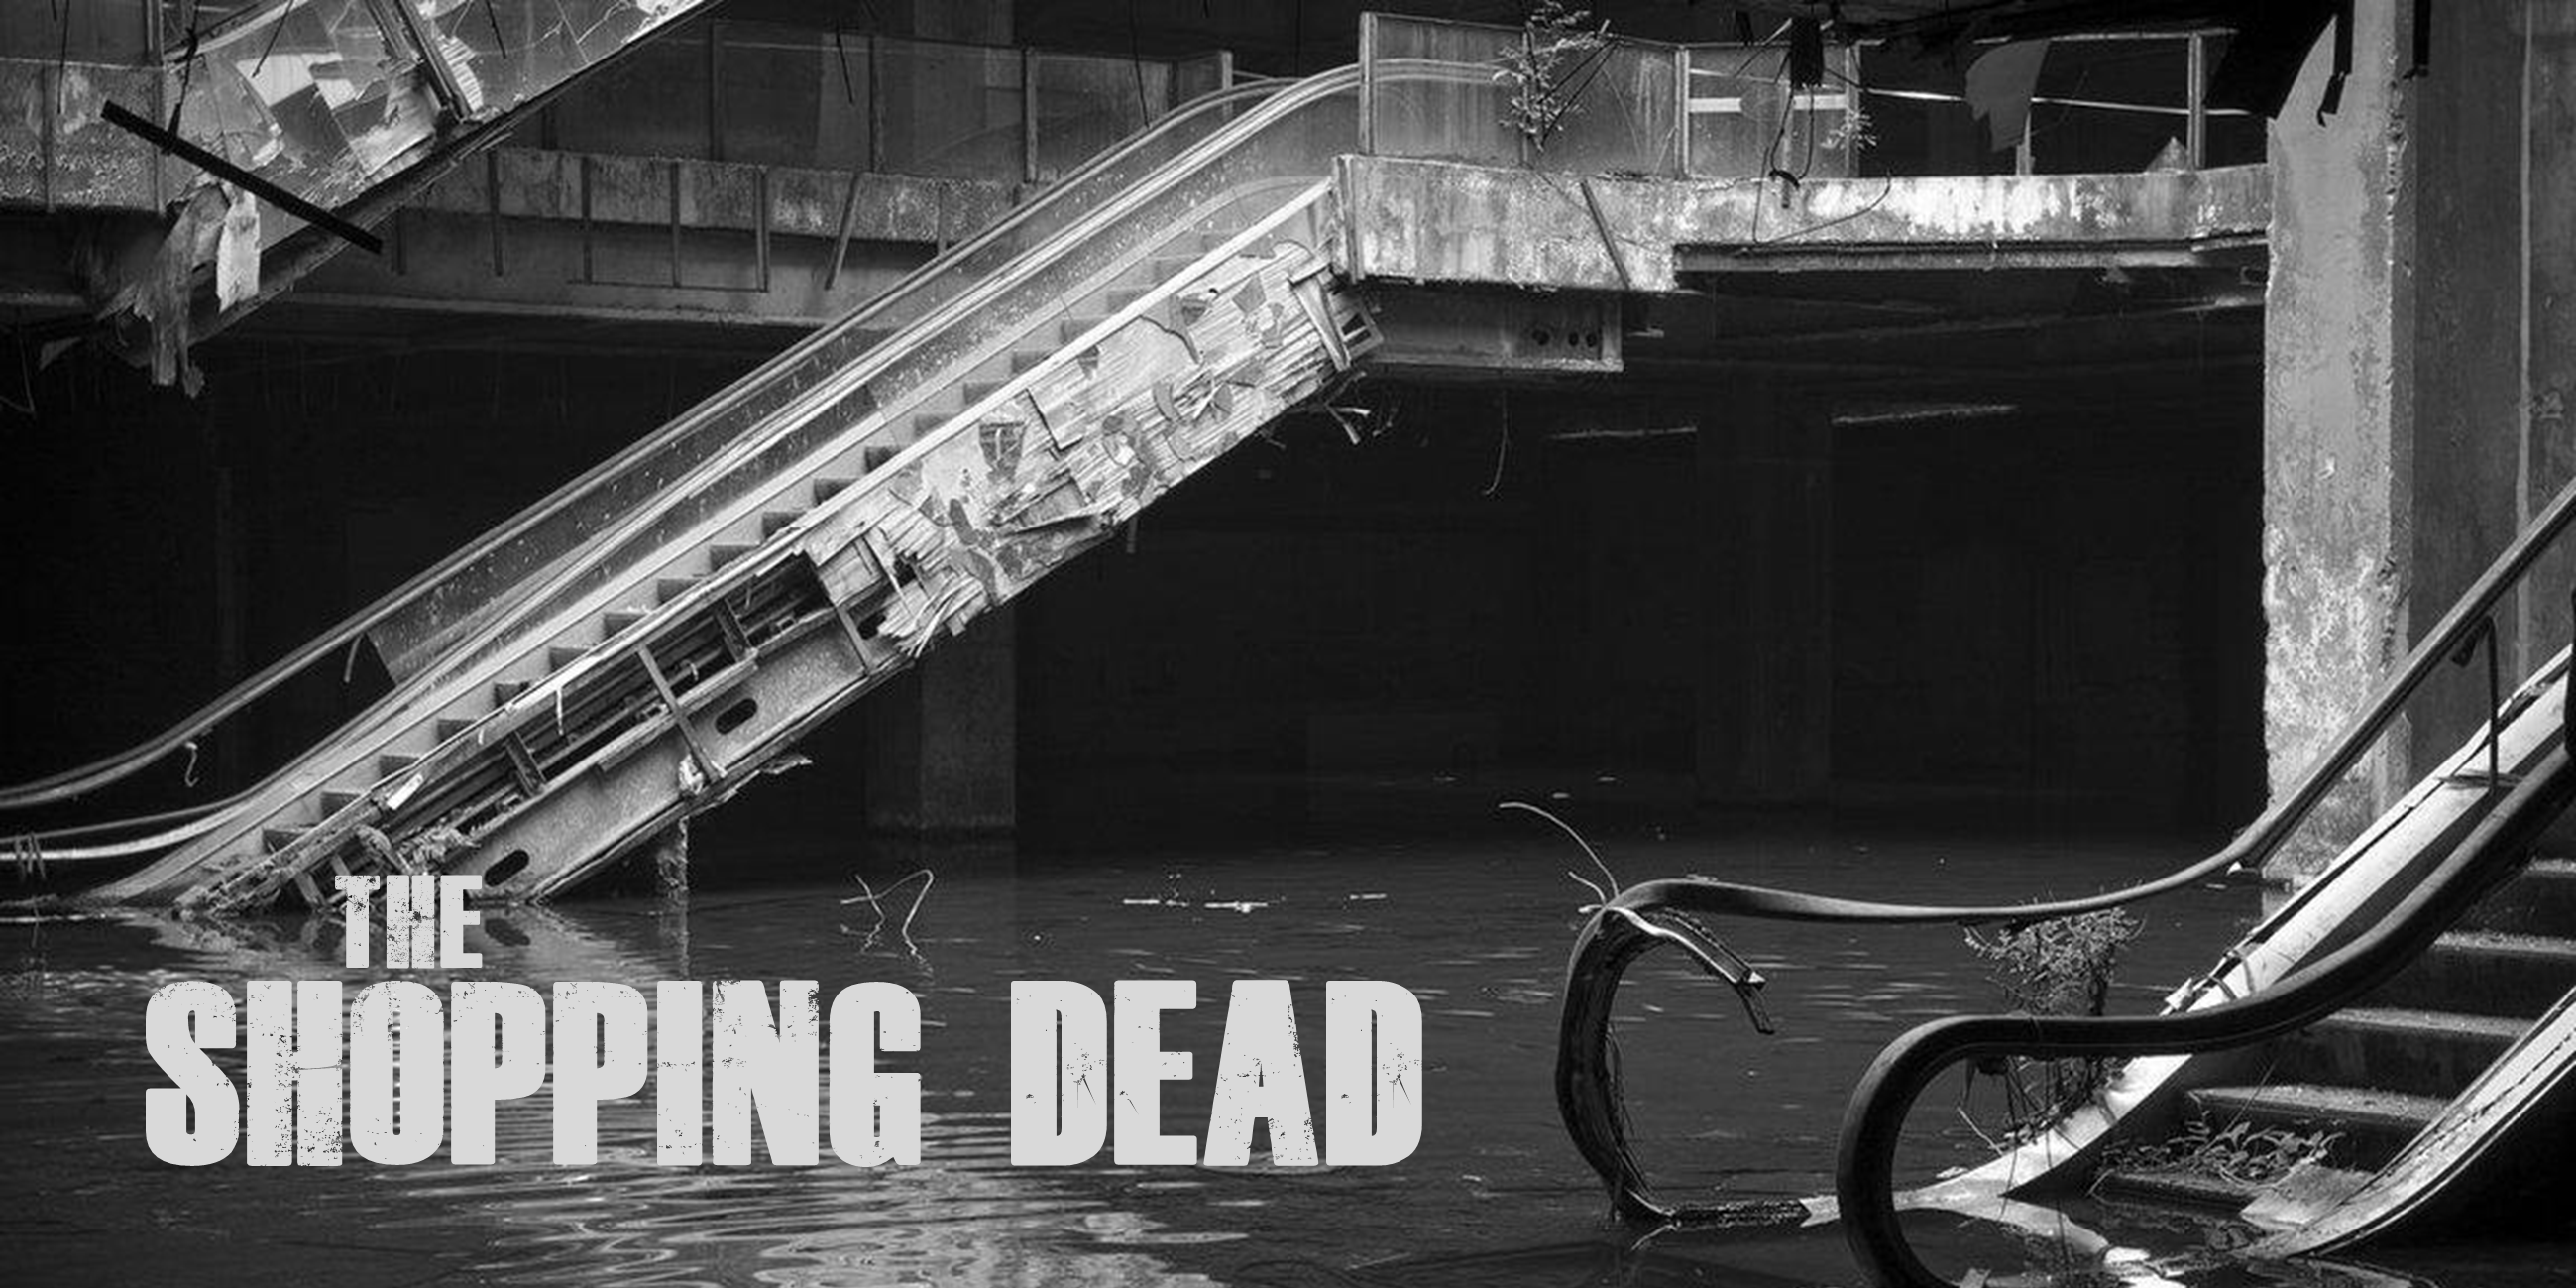 The Shopping Dead